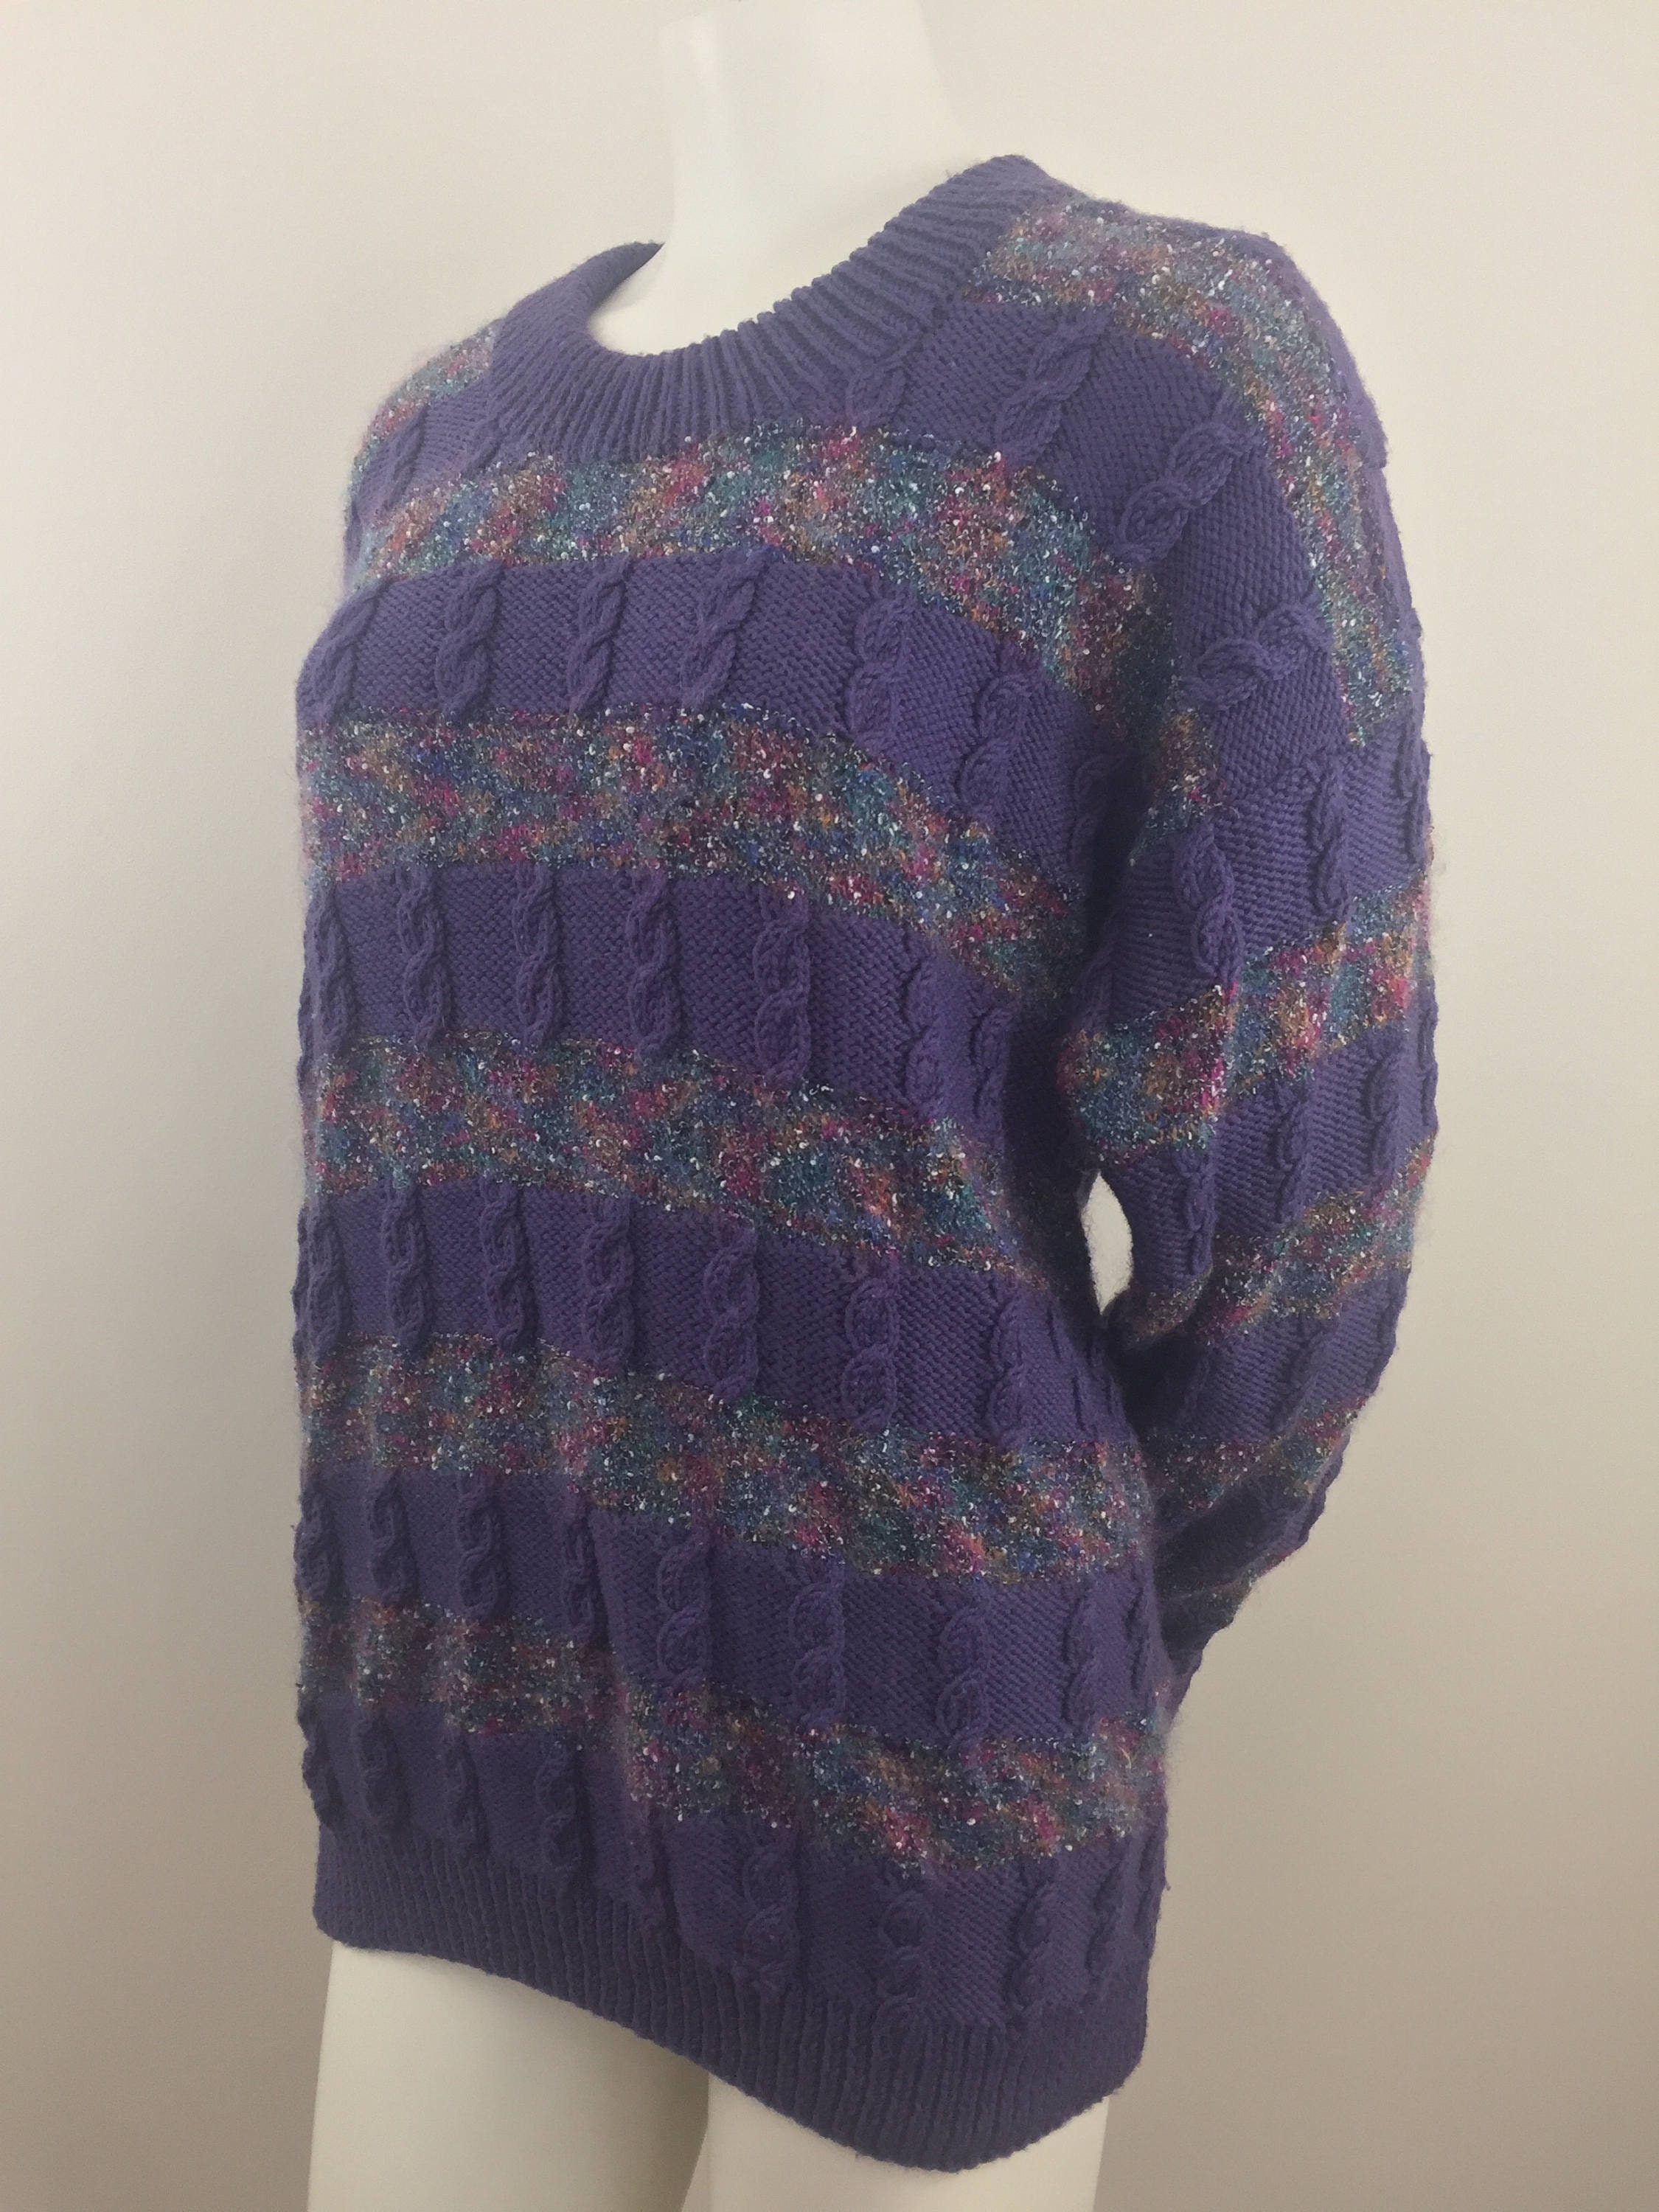 1990's Purple Mohair Blend Sweater|Hand-Knitted Sweater|Horizontal Striped Sweater|Fuzzy Wool Sweater|Cozy Casual Sweater|Size L